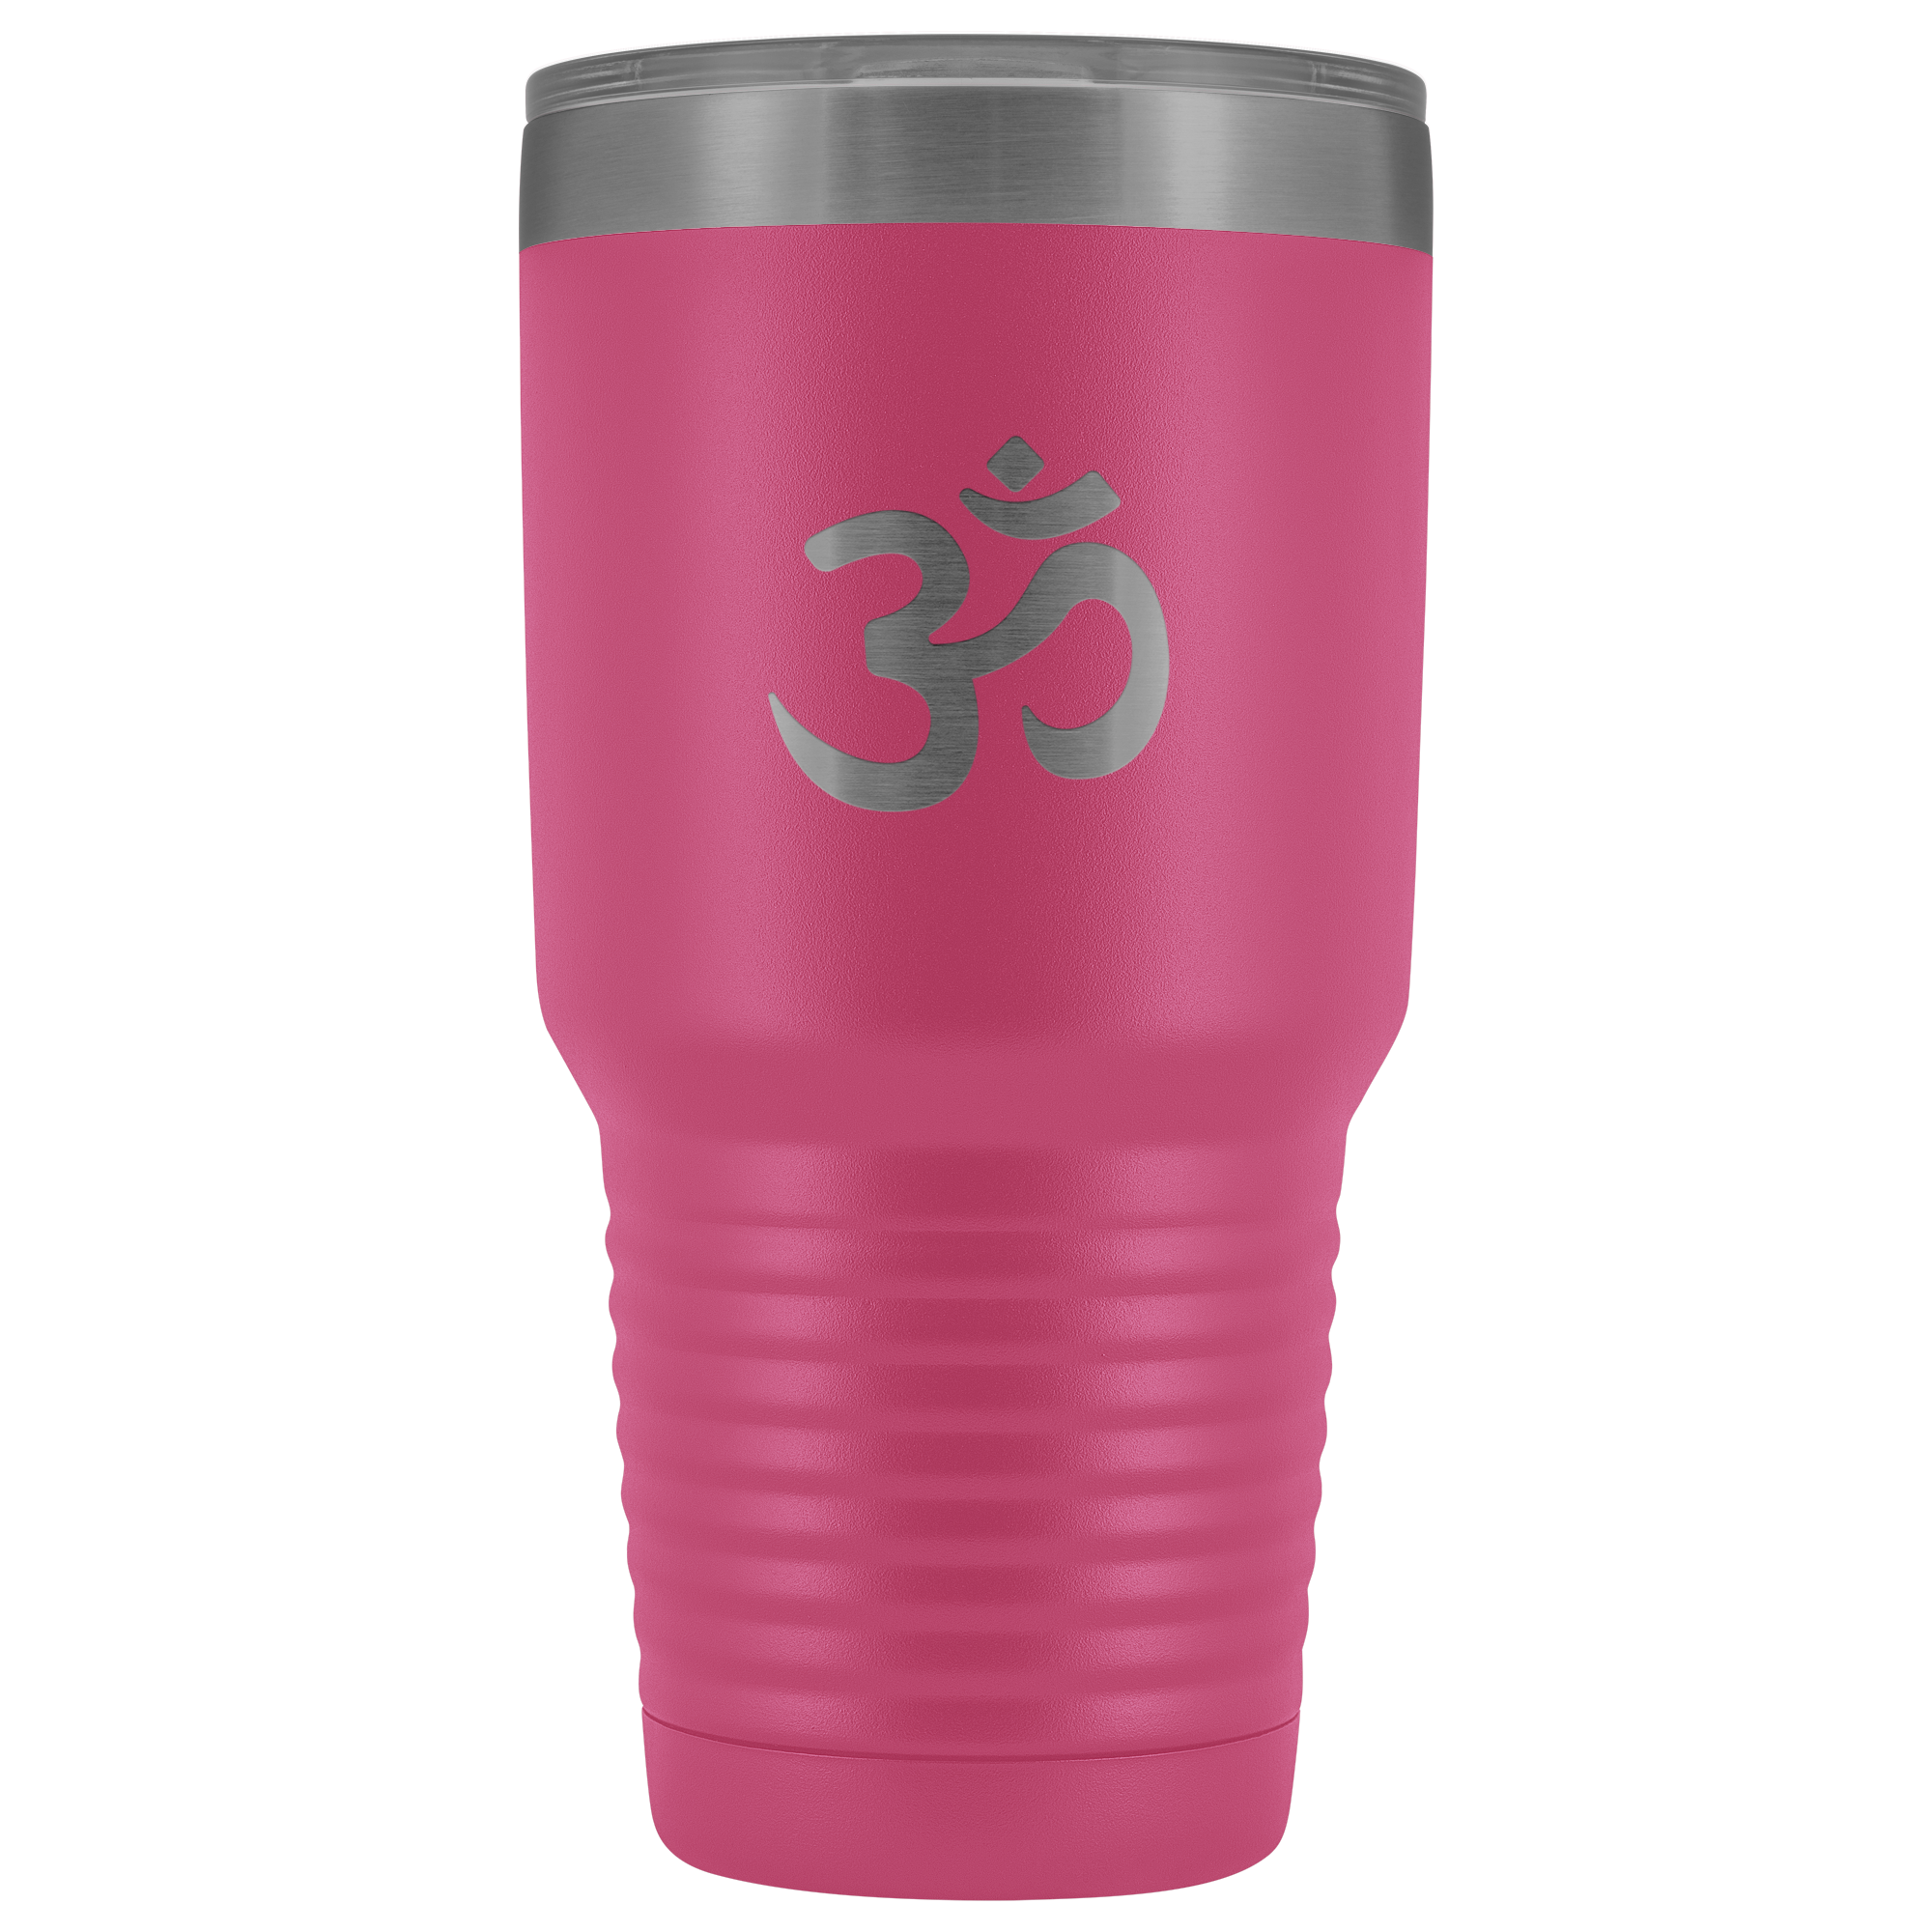 Laser etched Hindi / Sanskrit Om Symbol 30 Ounce stainless steel Vacuum insulated Tumbler